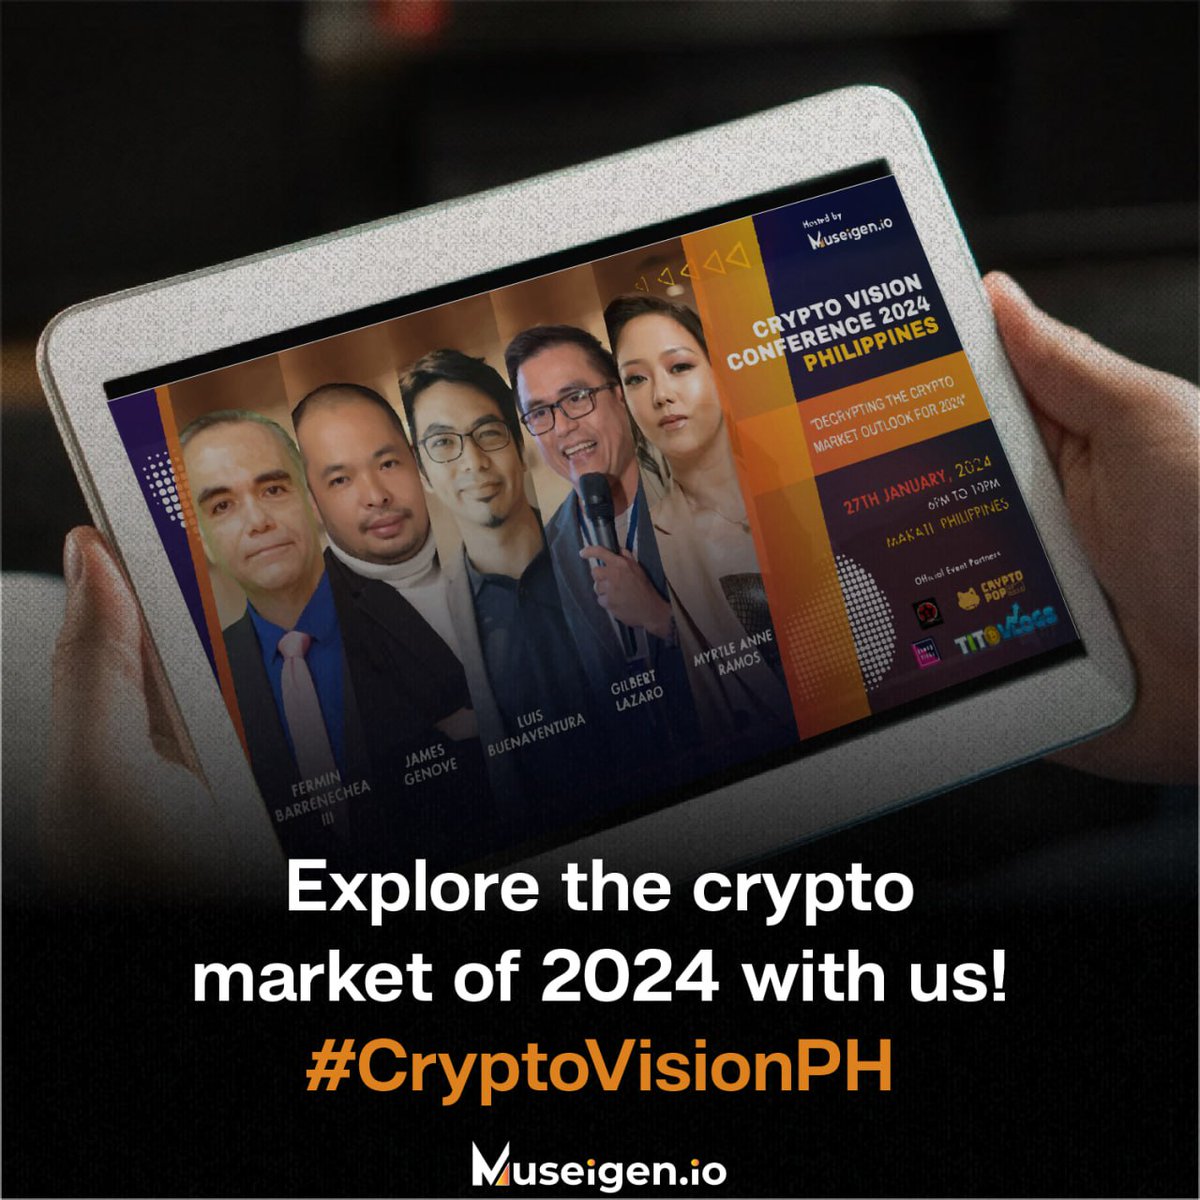 The Crypto Vision Conference 2024 is where insights meet innovation! Mark your calendars on January 27, 2024.

Comment 'Vision2024' below if you're interested to join this event!

#LearnWithMuseigen #MuseigenIO #CVC2024 #DecryptoCrypto2024 #CryptoVisionPH2024